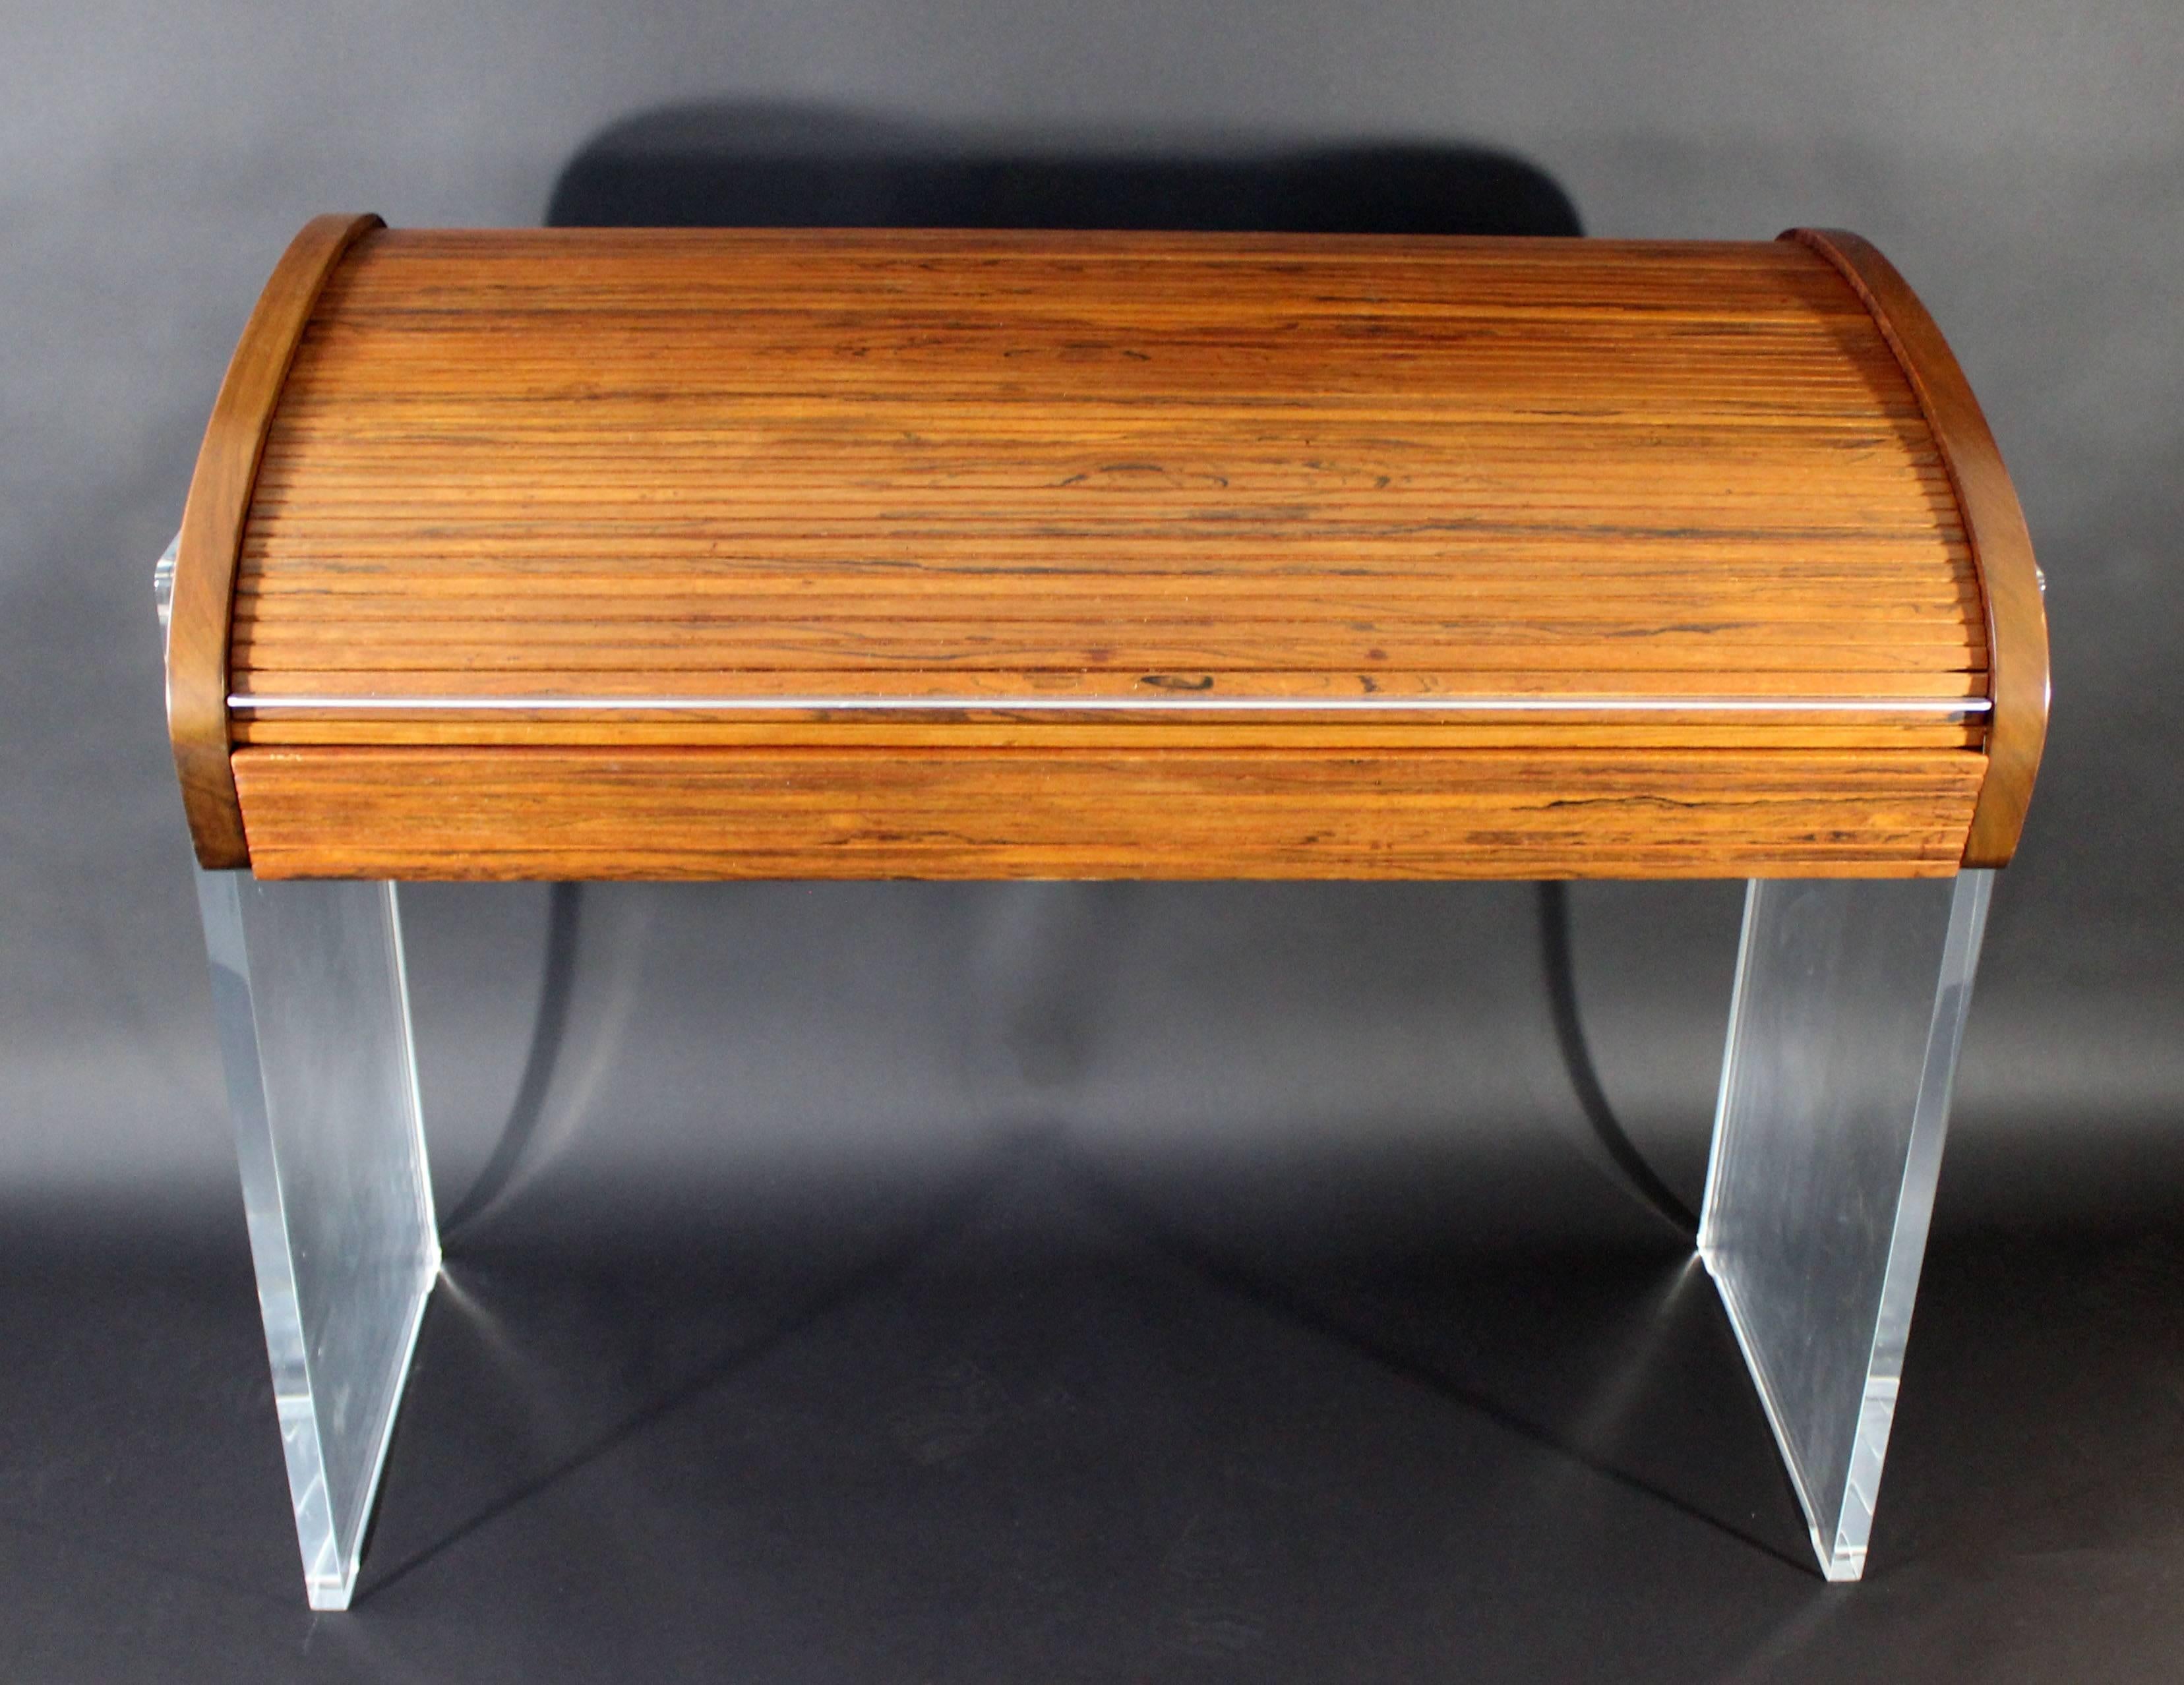 For your consideration is an utterly fabulous, Lucite and rosewood, roll-top desk, by Vladimir Kagan, circa the 1960s. In excellent condition. Original tags. The dimensions are 44